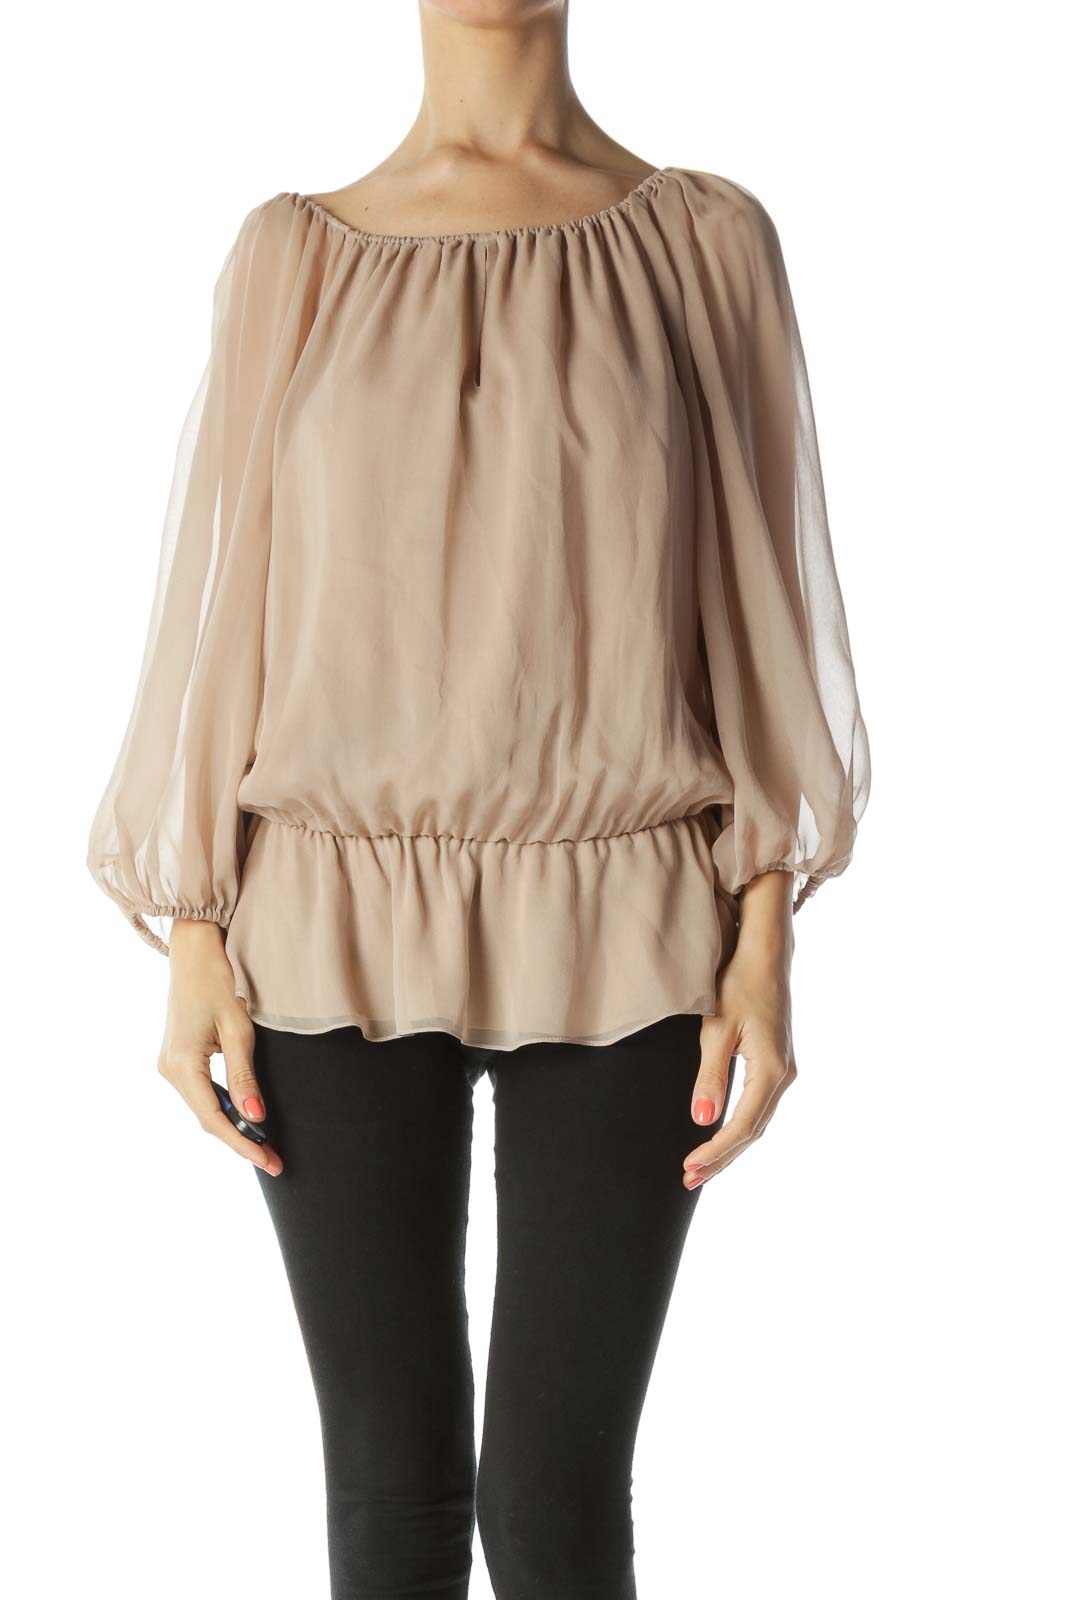 Beige Off-The-Shoulder Peasant-Sleeve Cinched-Waist Blouse Front